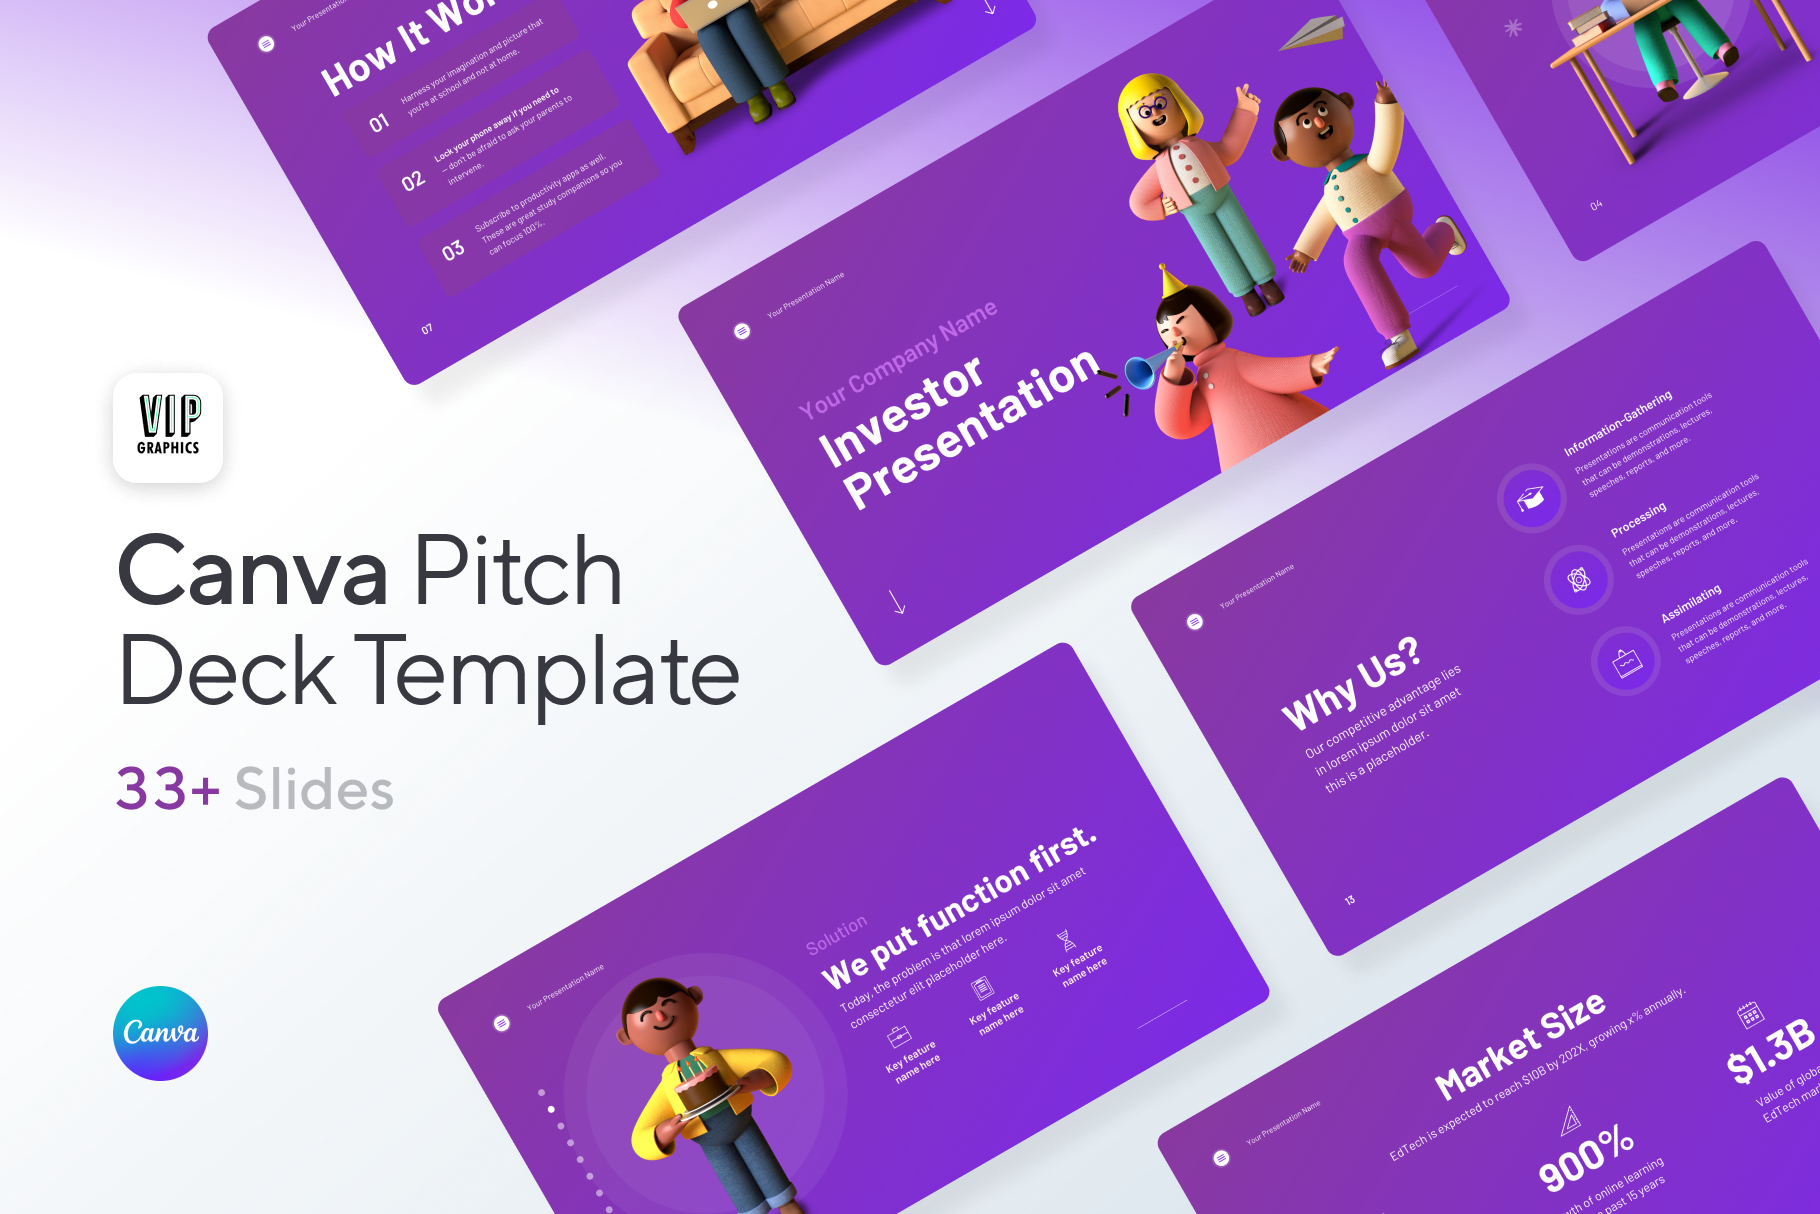 Canva Pitch Deck Template VIP Graphics